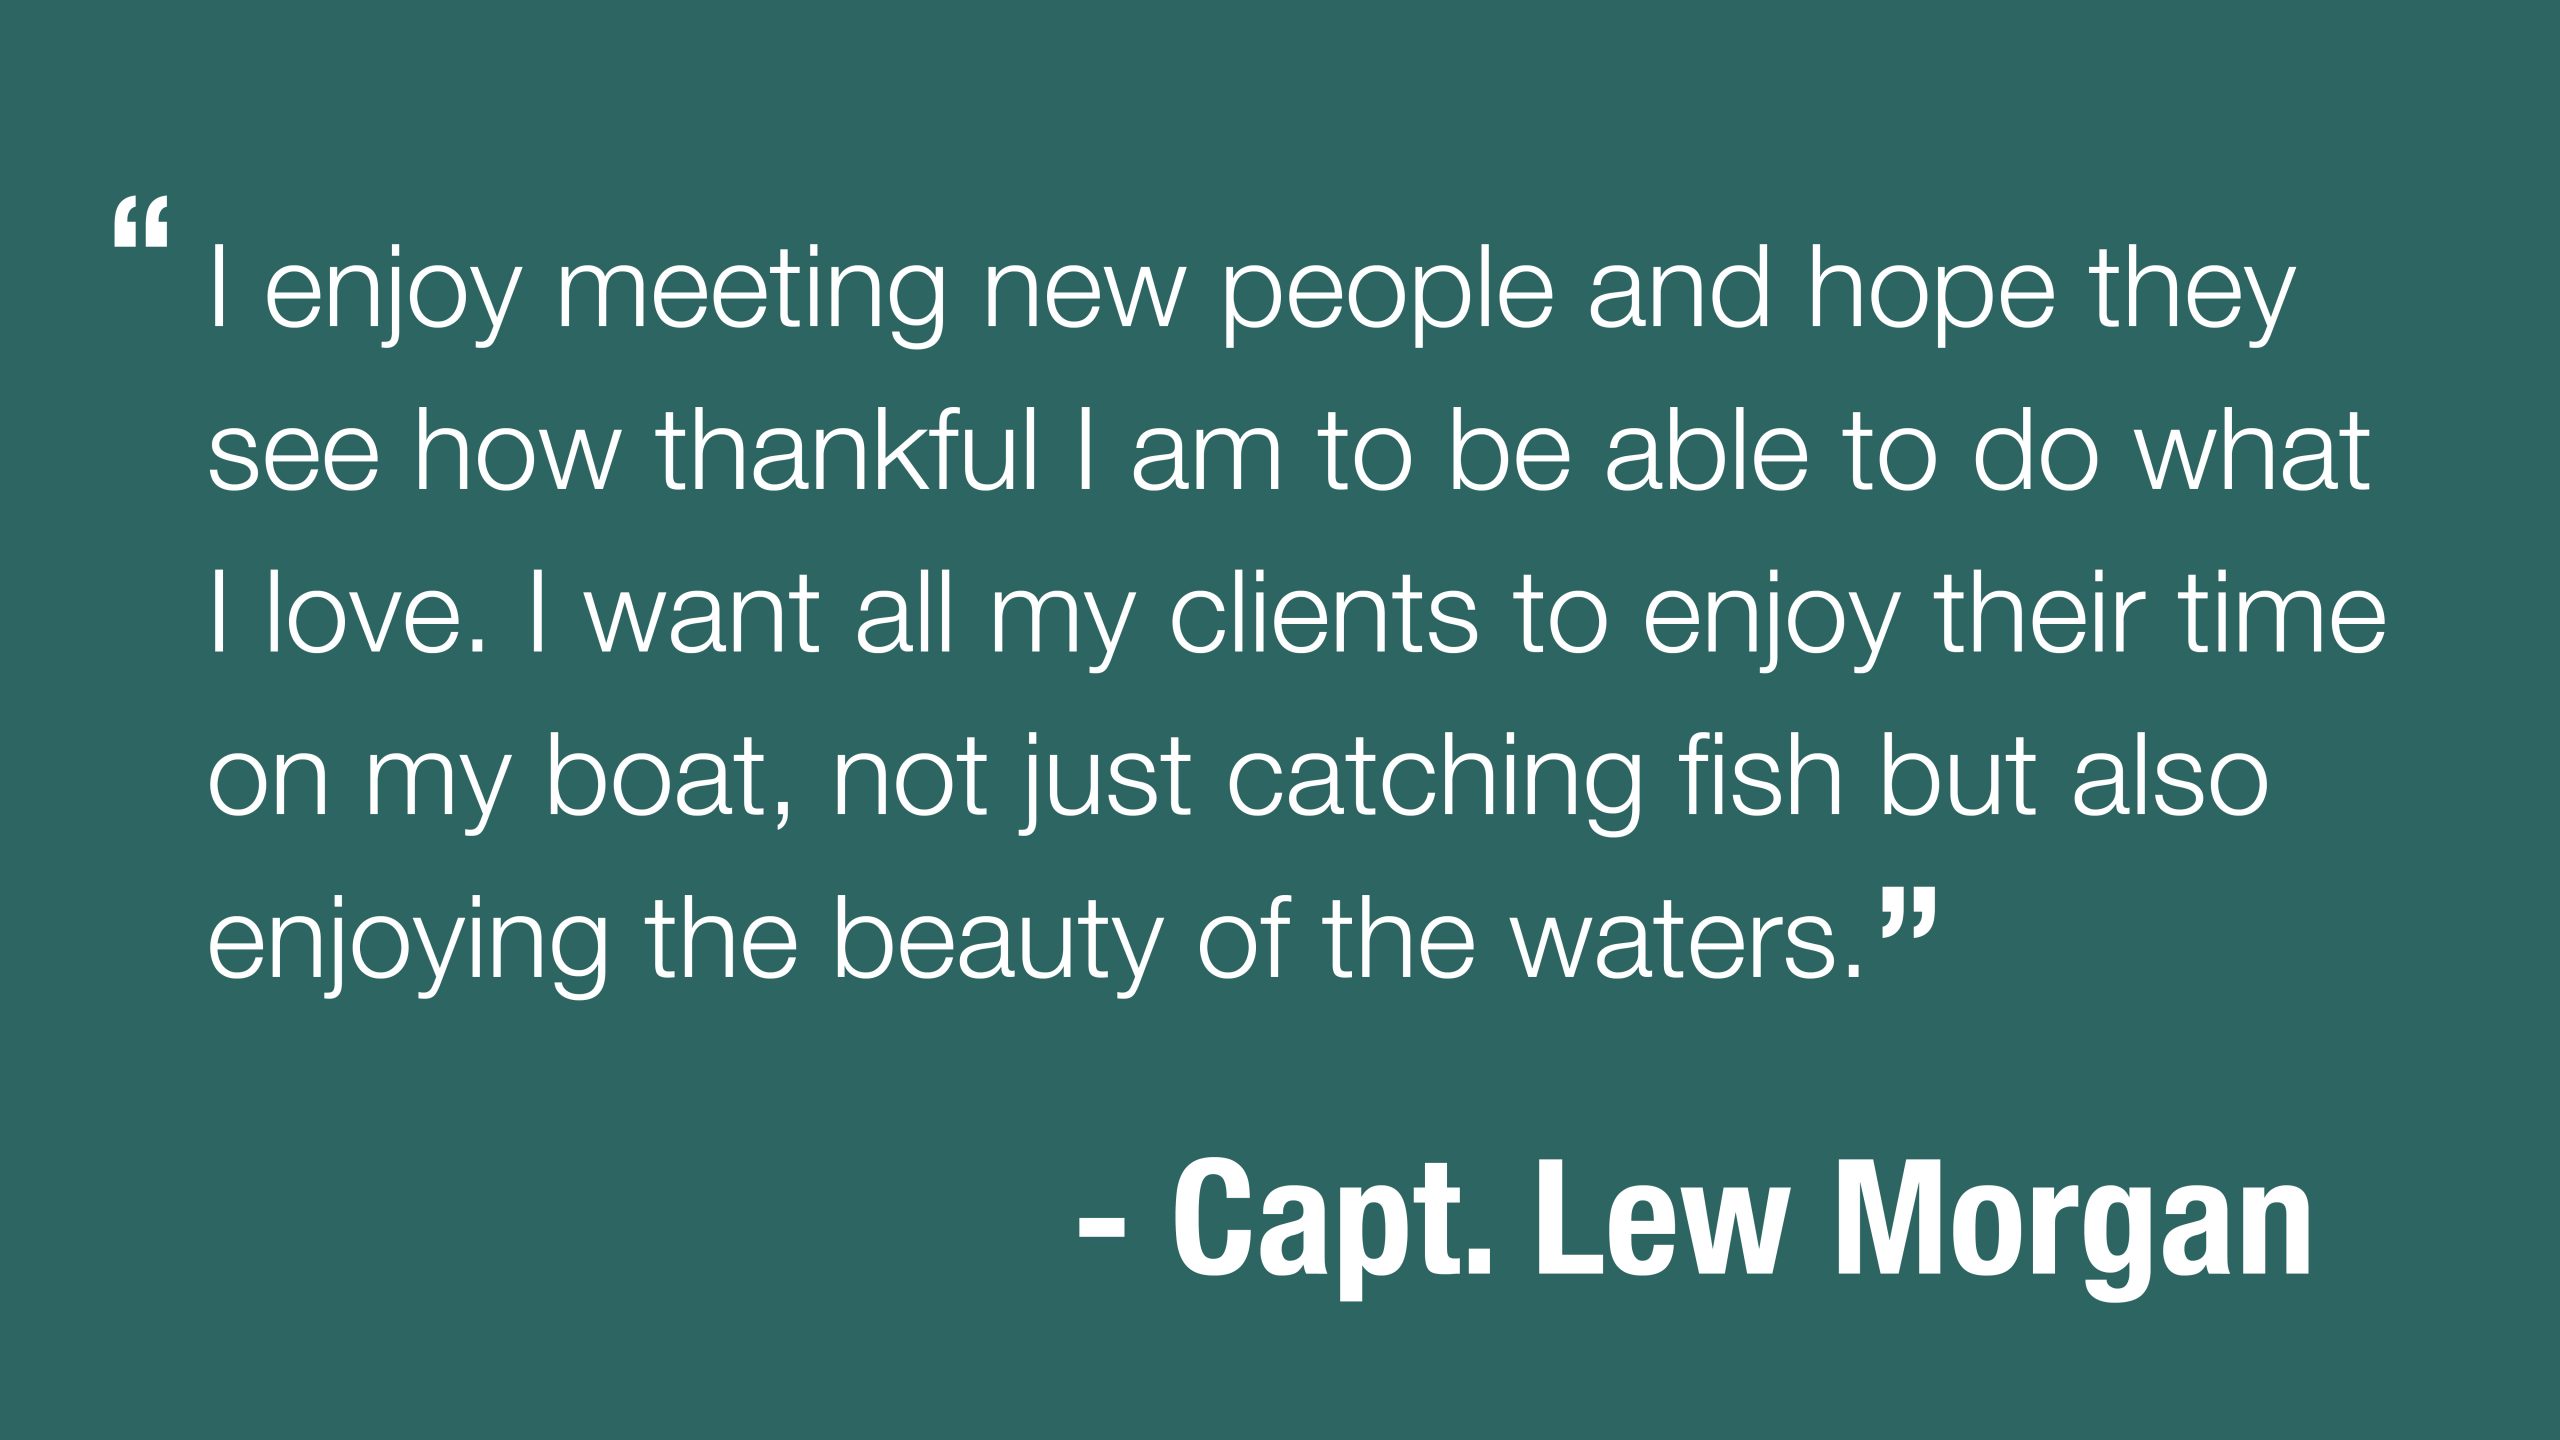 "I enjoy meeting new people and hope they see how thankful I am to be able to do what I love. I want all my clients to enjoy their time on my boat, not just catching fish but also enjoying the beauty of the waters." - Capt. Lew Morgan